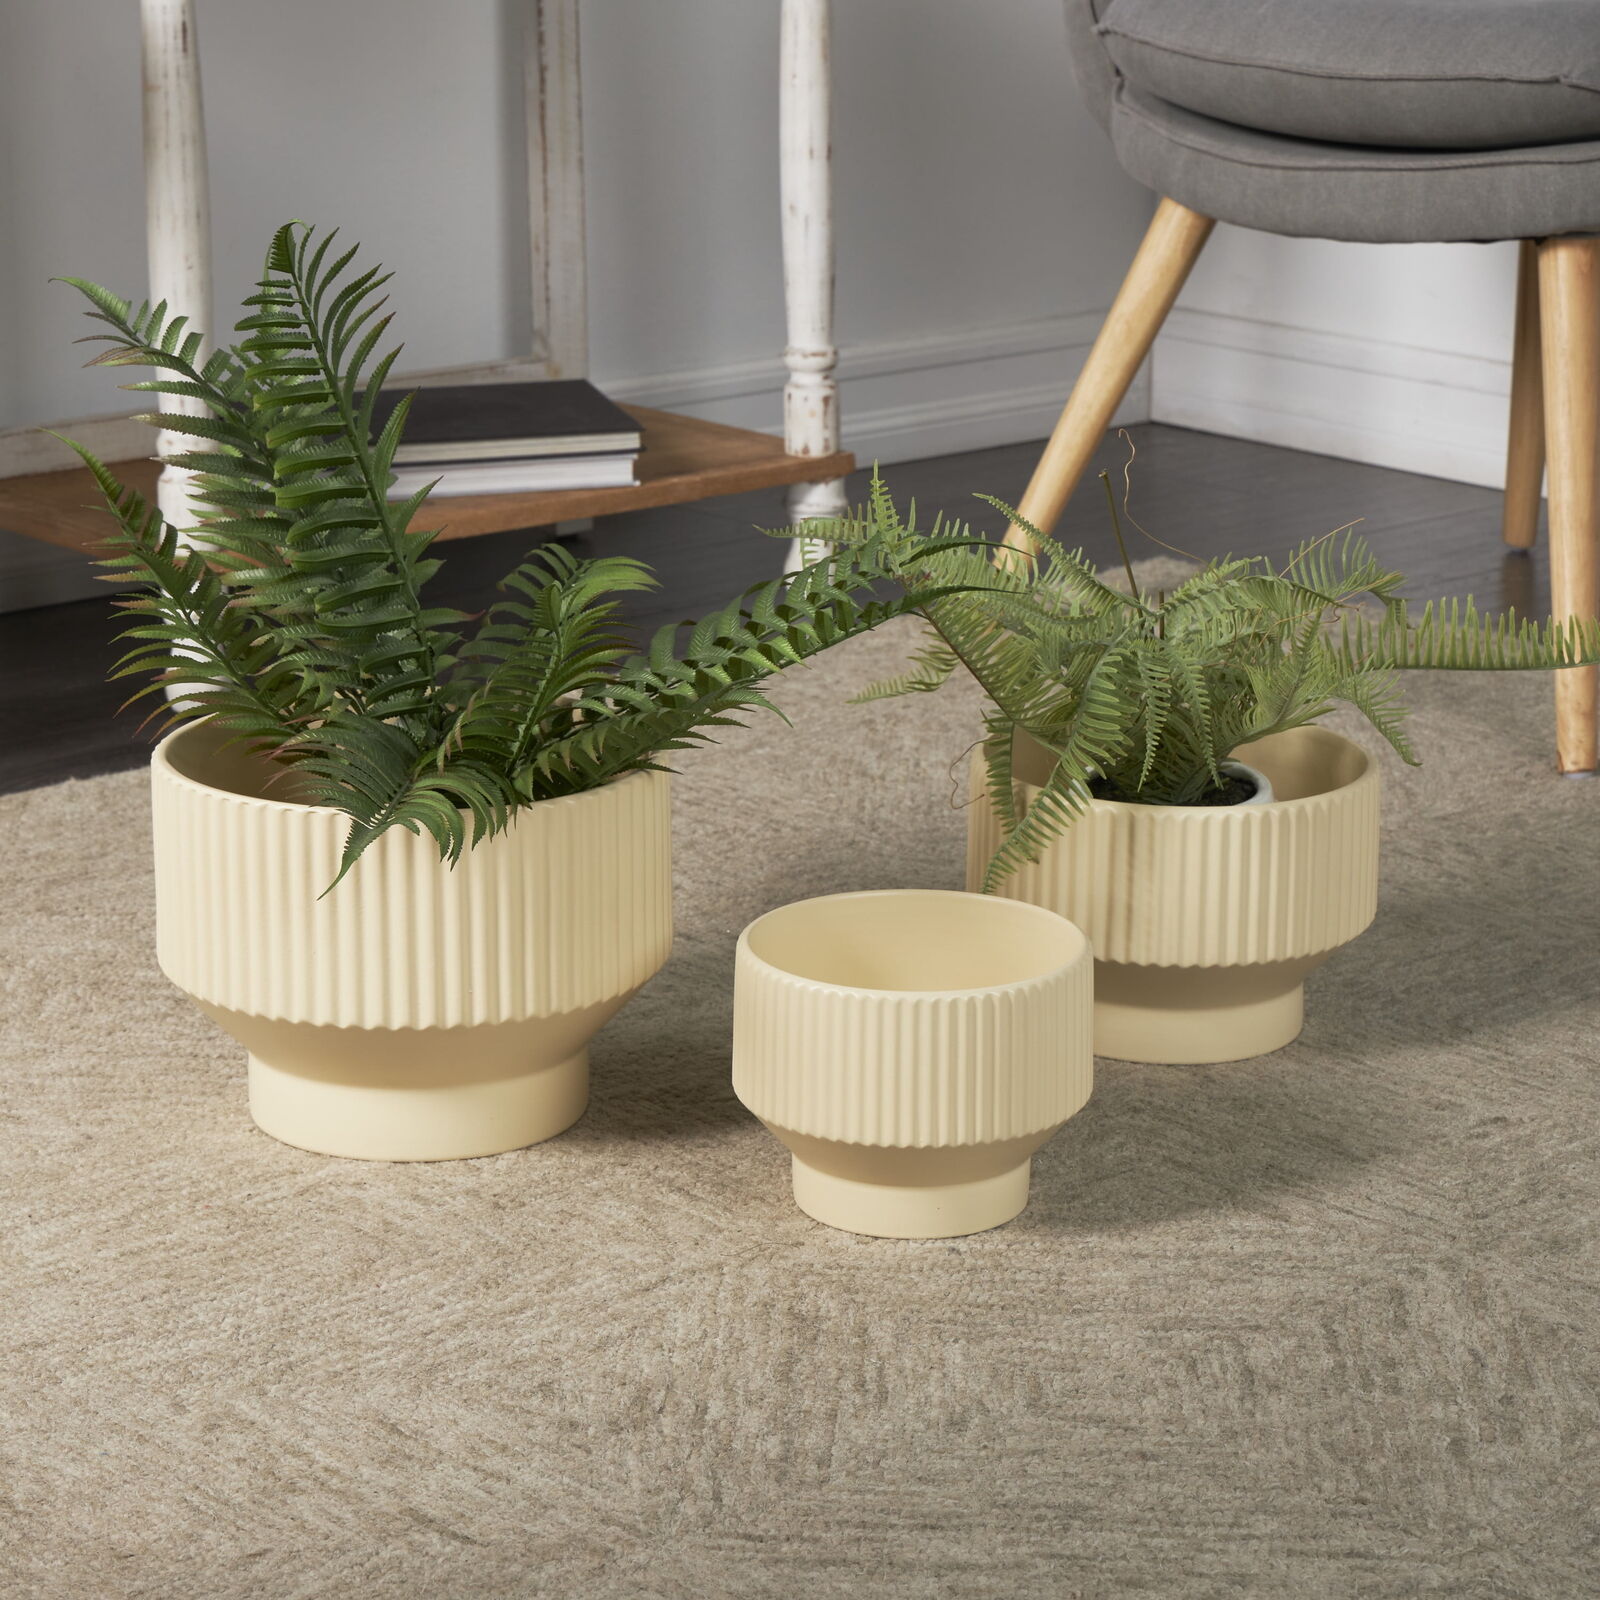 10", 8", 7"W Wide Cream Ceramic Planter with Linear Grooves and Tapered Bases Без бренда - фотография #2